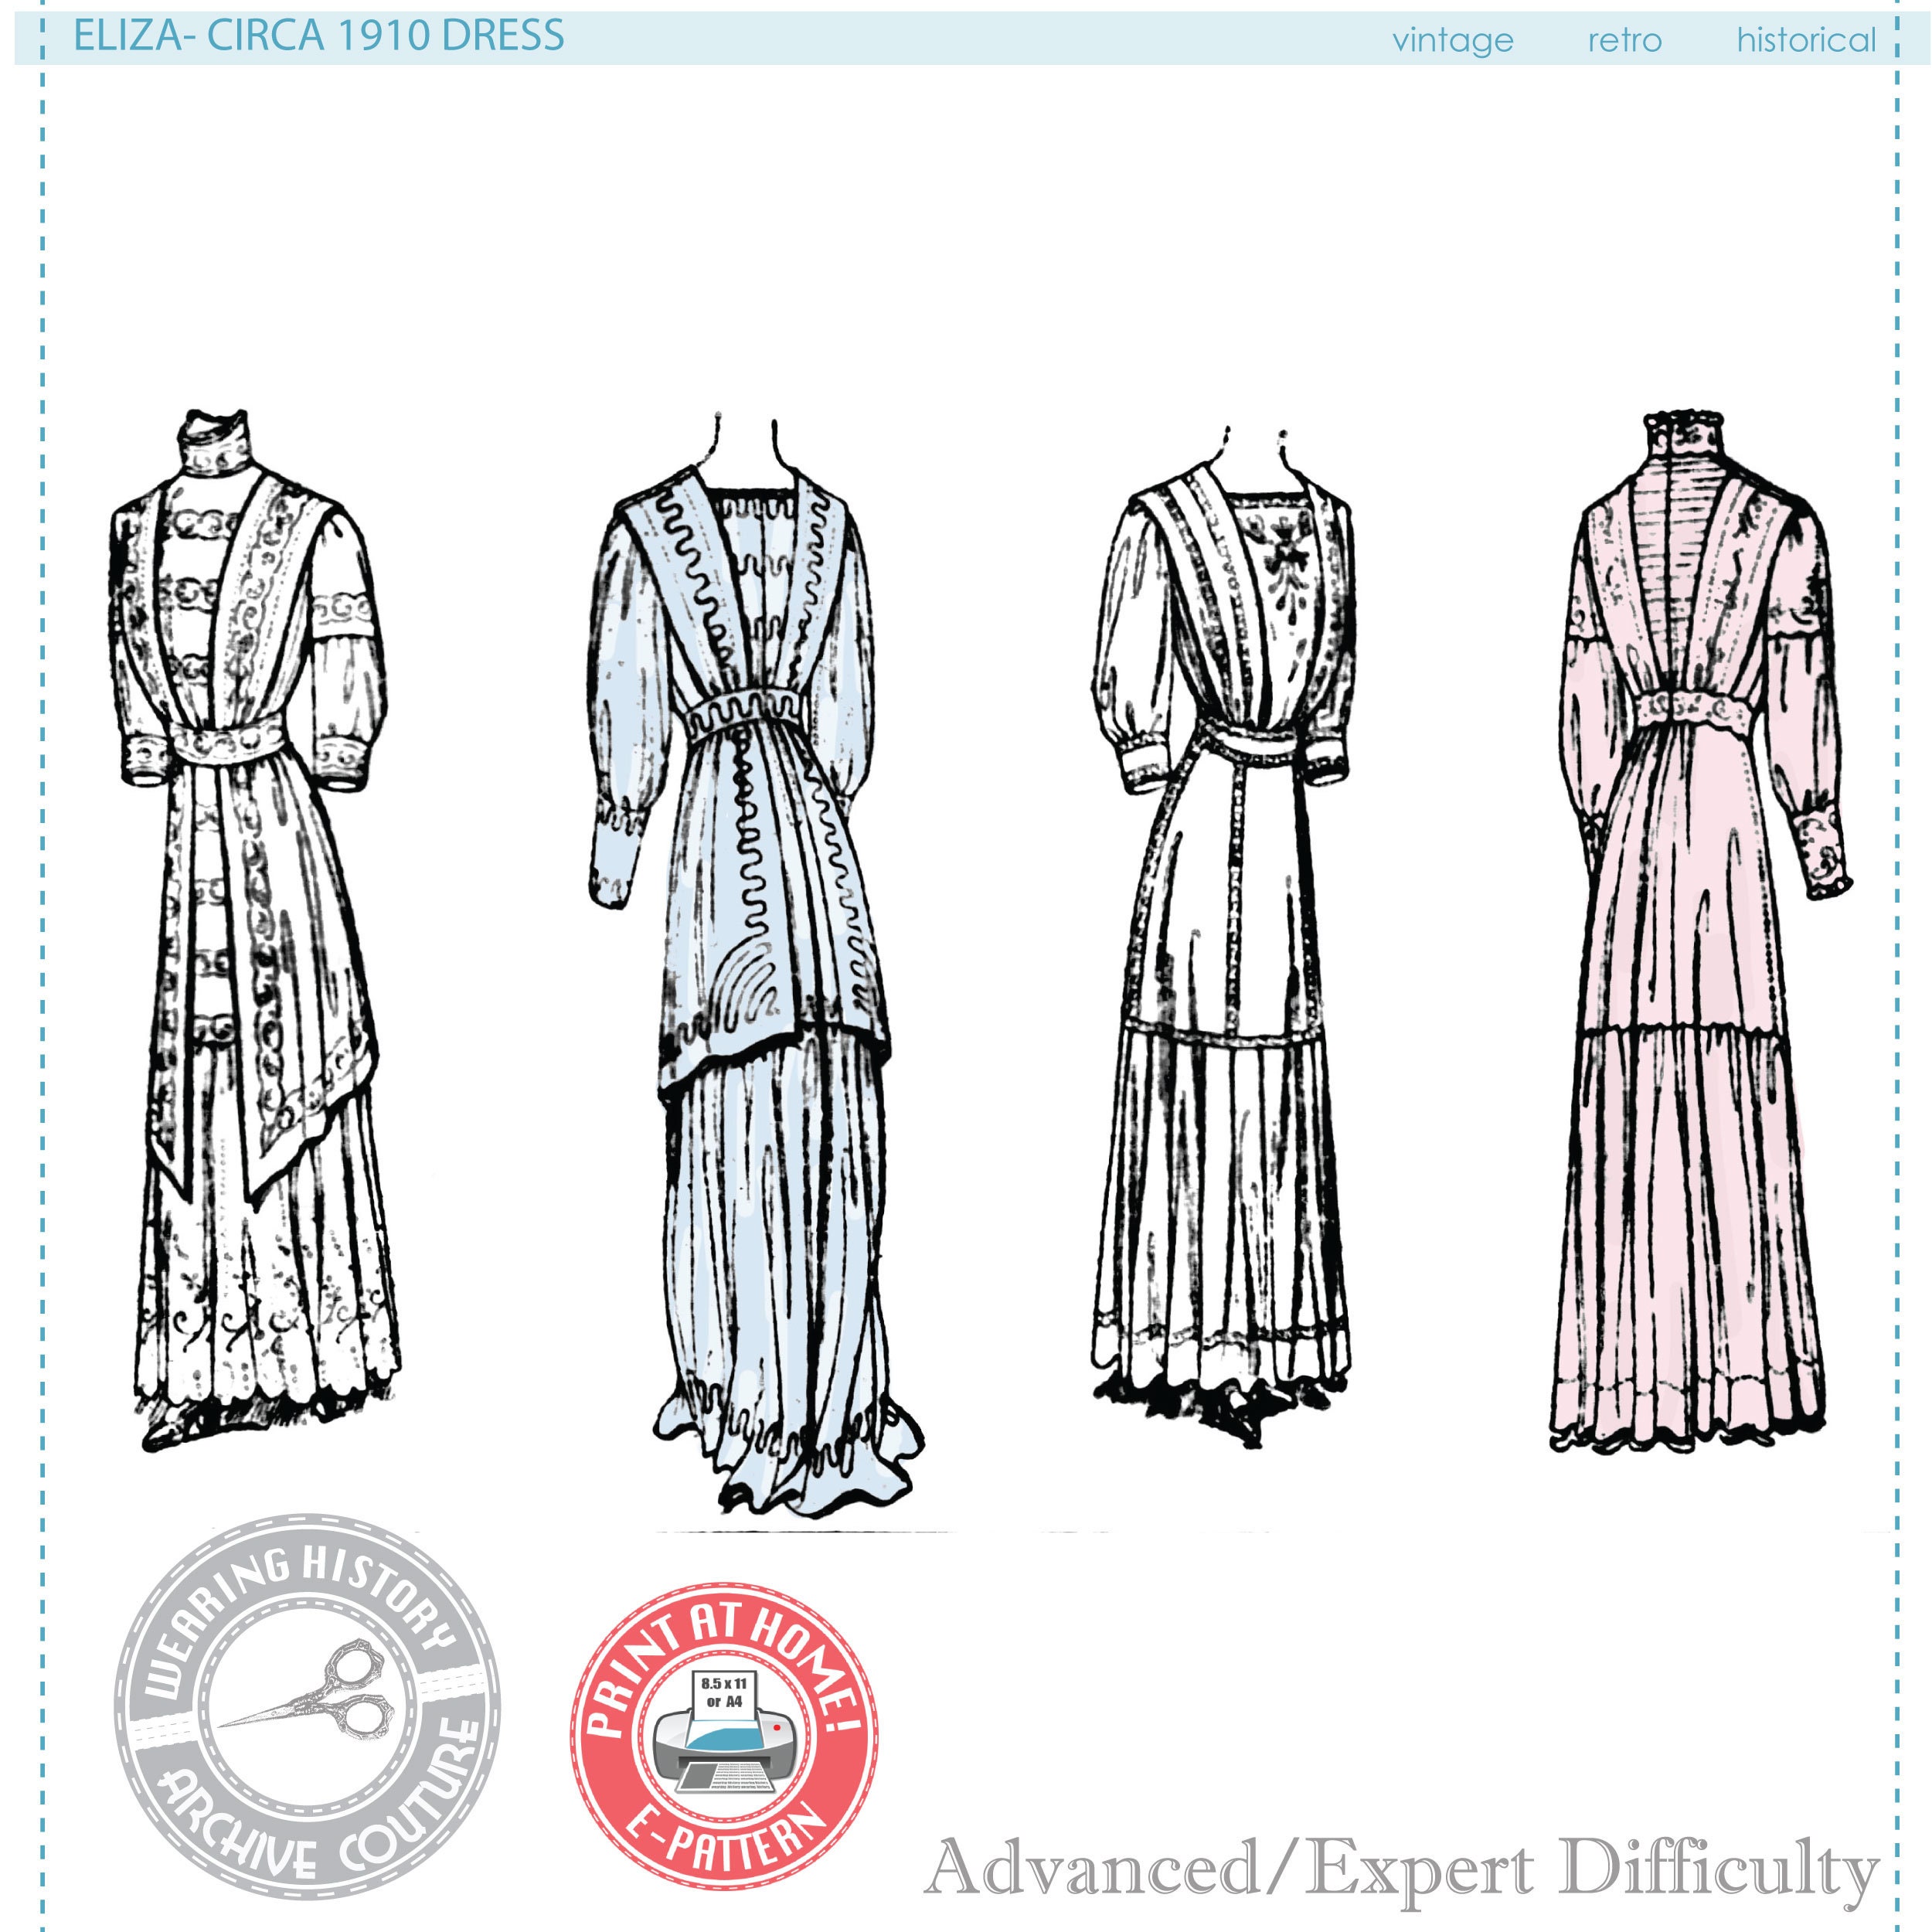 9 Unique Edwardian Corset Patterns 1900-1910 Digital E Pattern Printable  PDF Pack One From Corset Cutting and Making: 